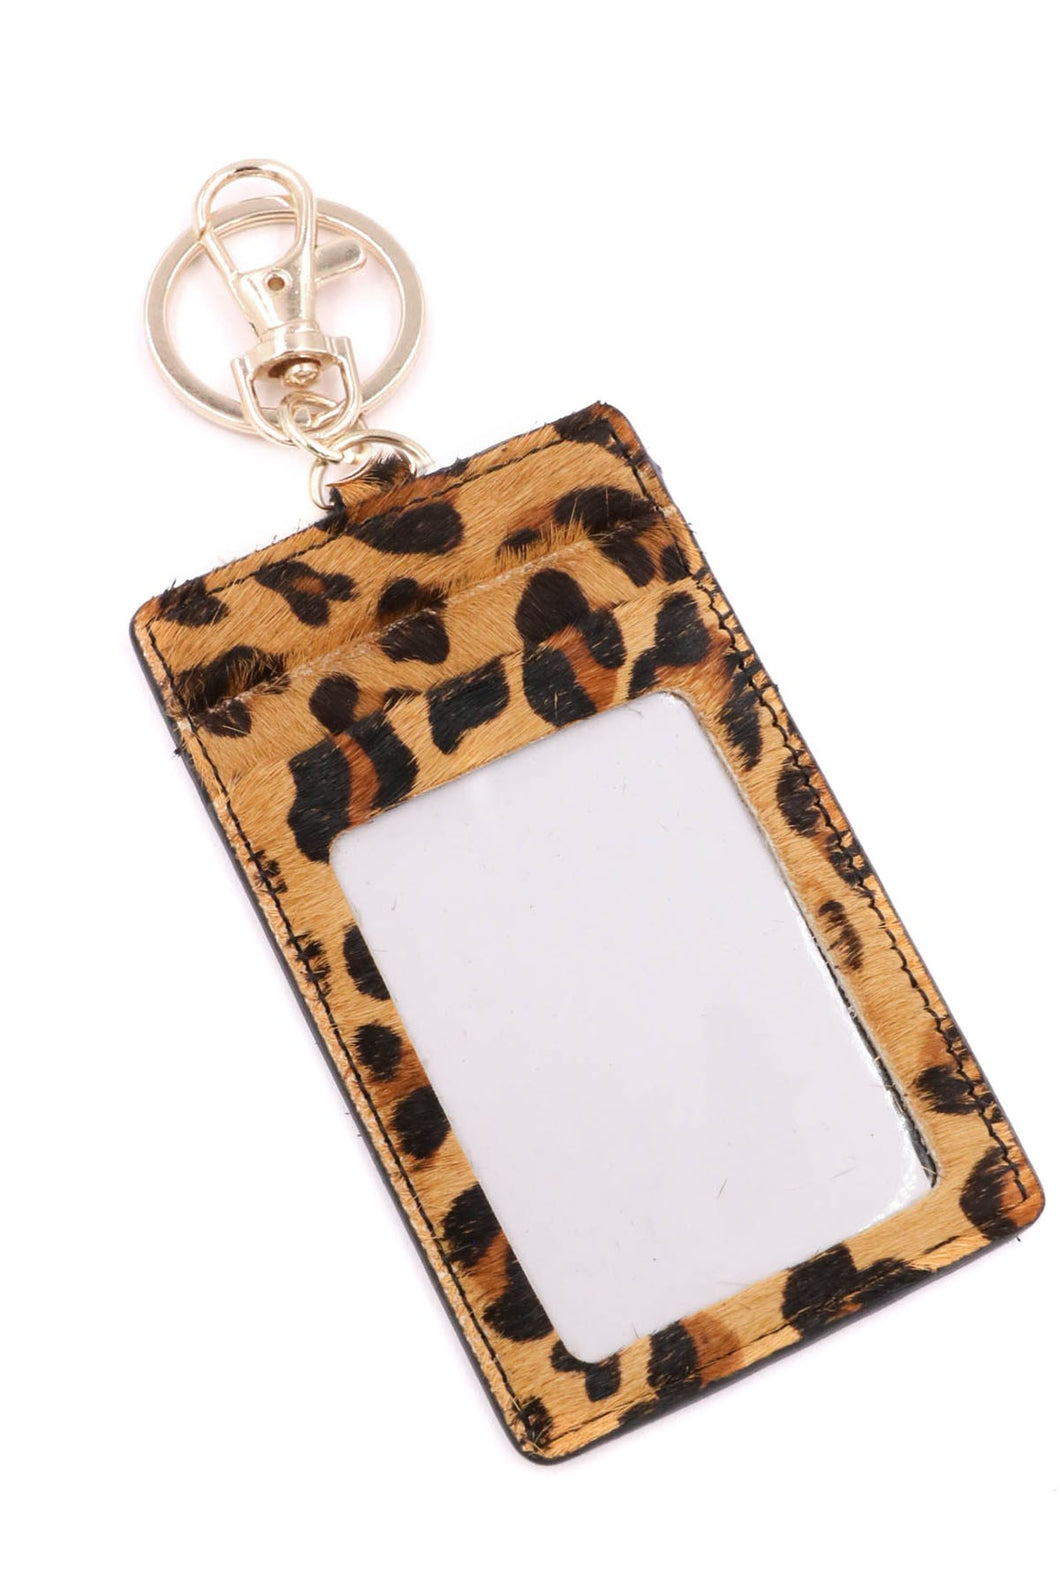 Faux Fur/Leather Card Holder Keychain